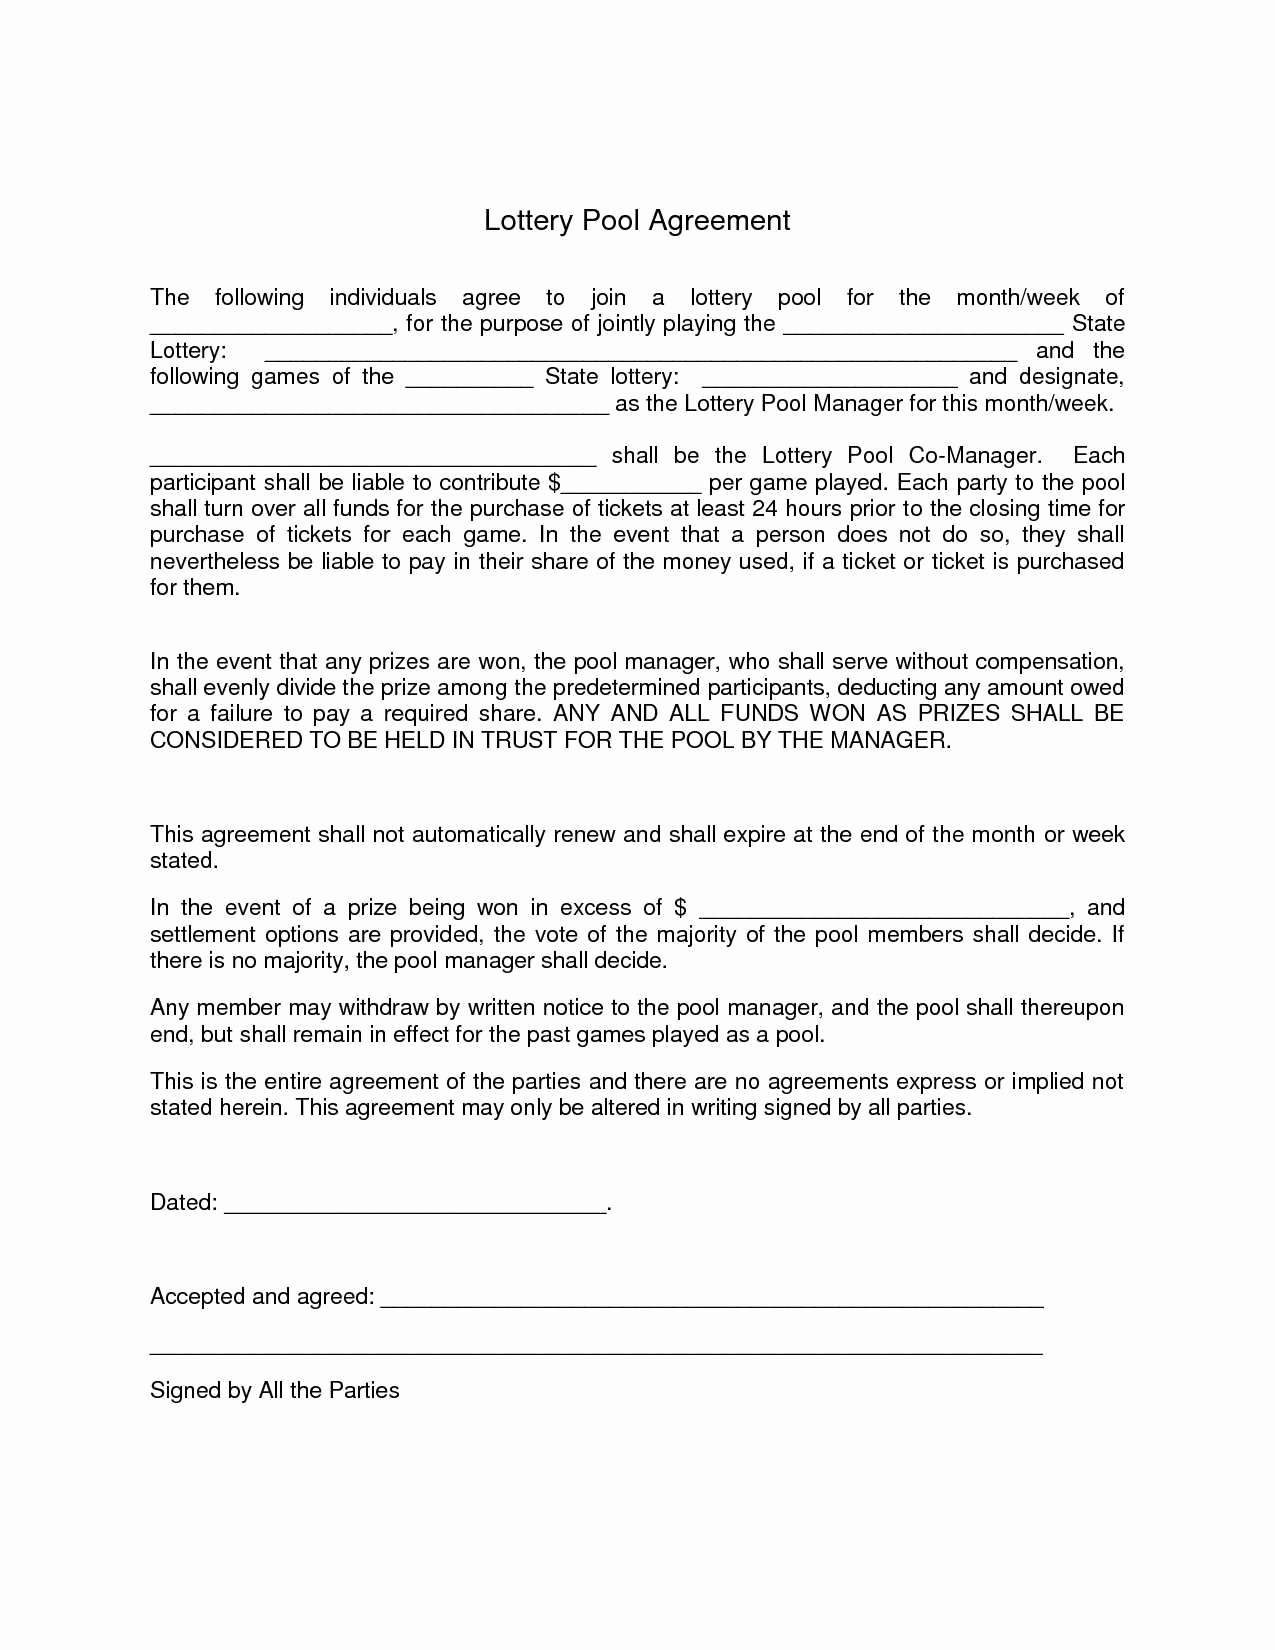 Group Lottery Contract Awesome Lottery Agreement form Free Simple Fice Lottery Pool